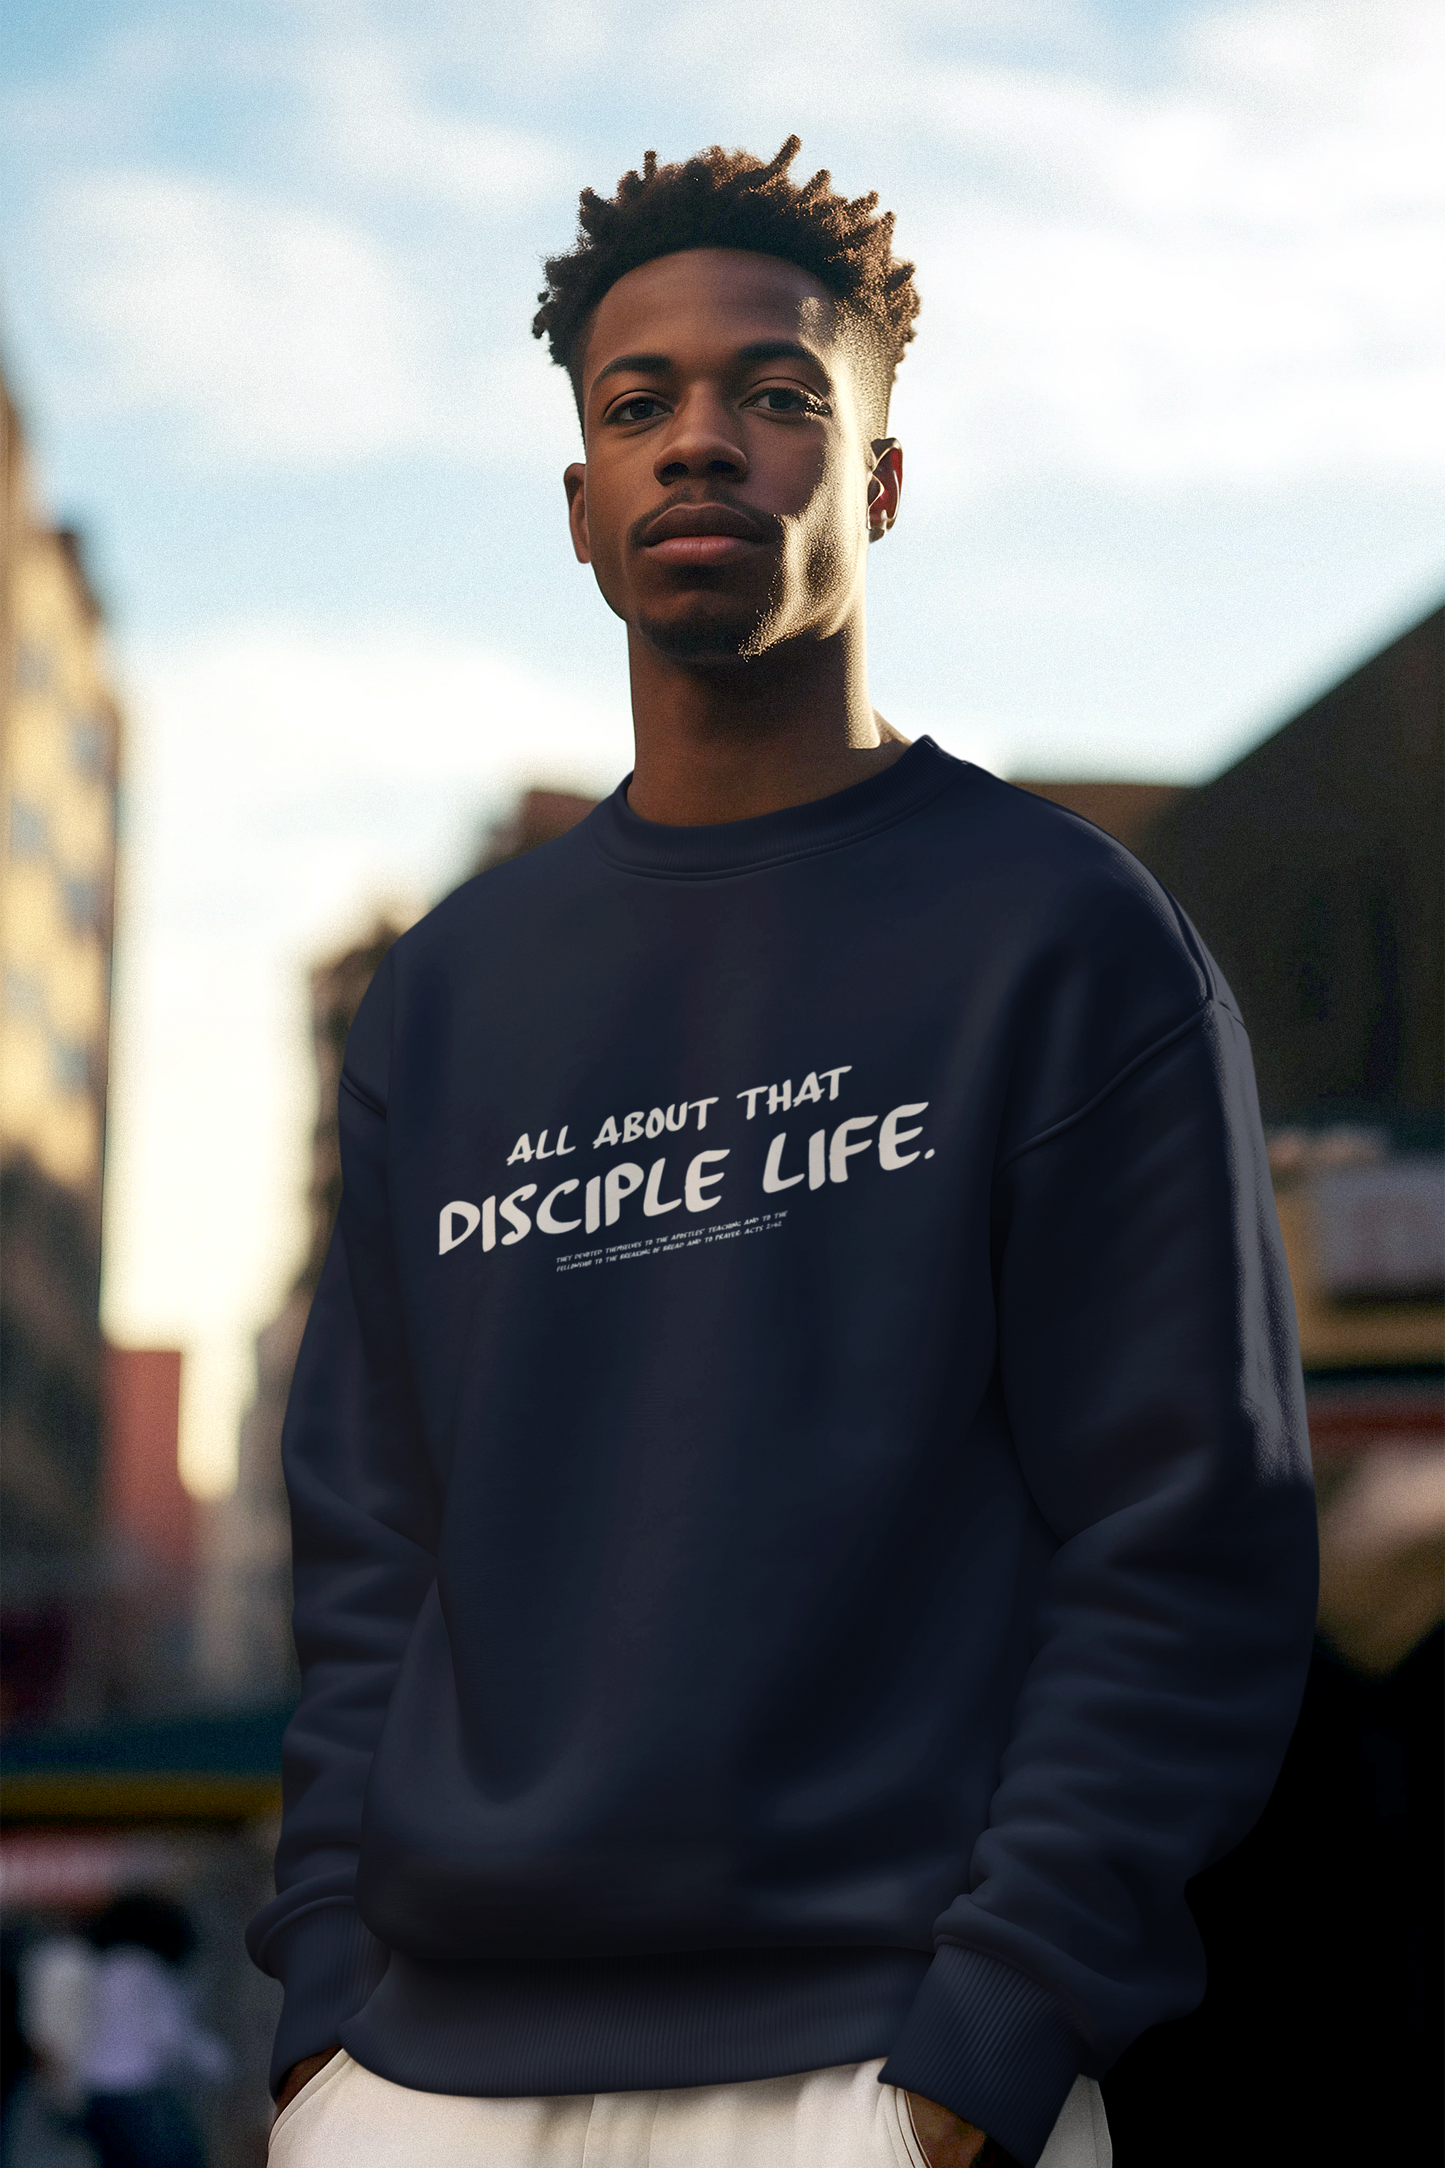 All About that Disciple Life. Sweatshirt.